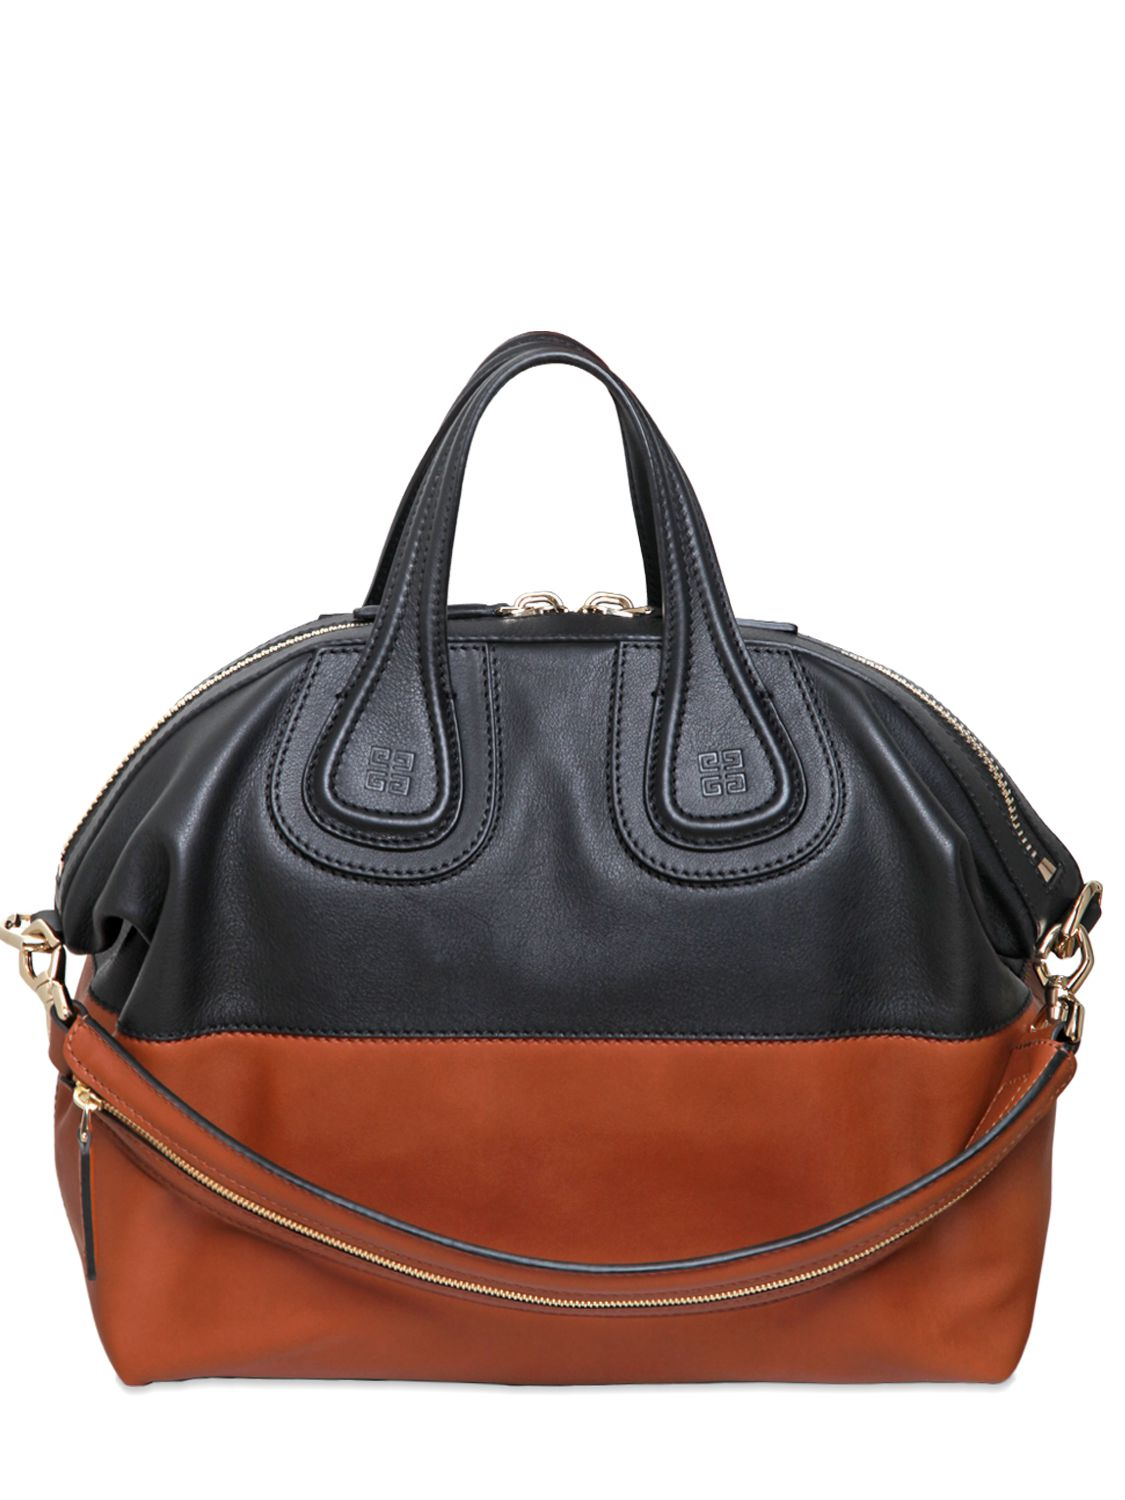 Lyst - Givenchy Medium Nightingale Two Tone Leather Bag in Brown